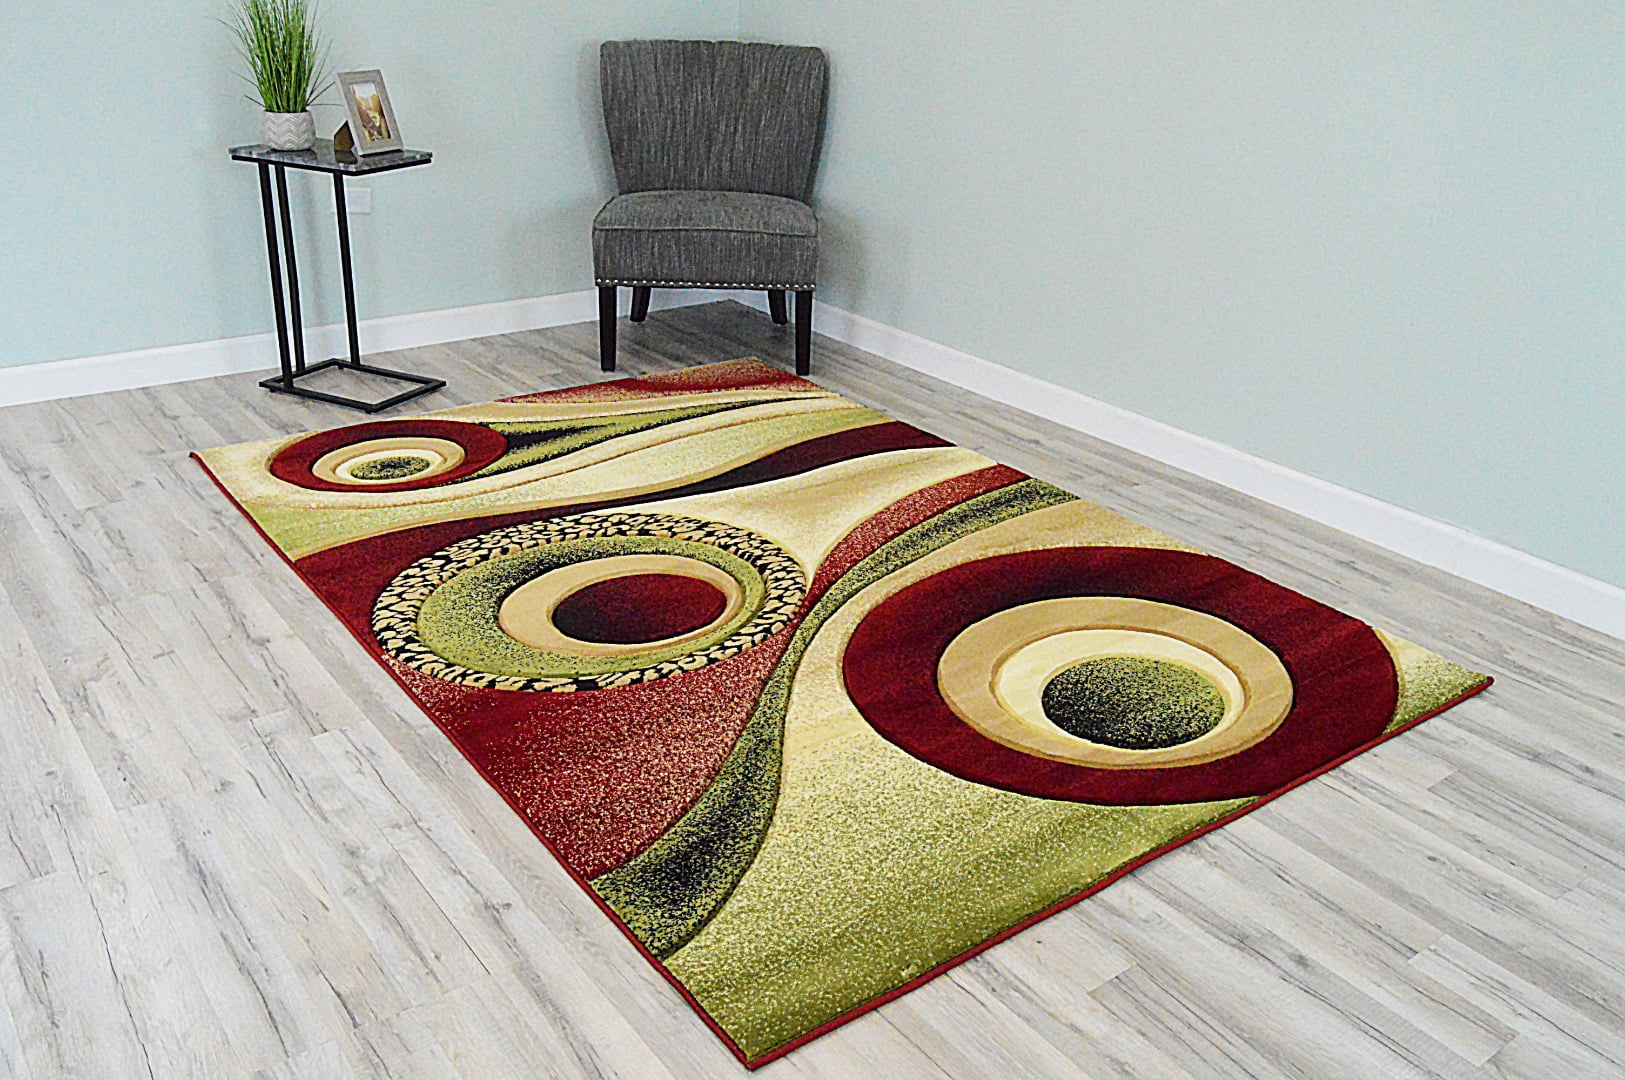 2x4 CARVED CIRCLES ABSTRACT GEOMETRIC MAT RUG 5 COLORS 